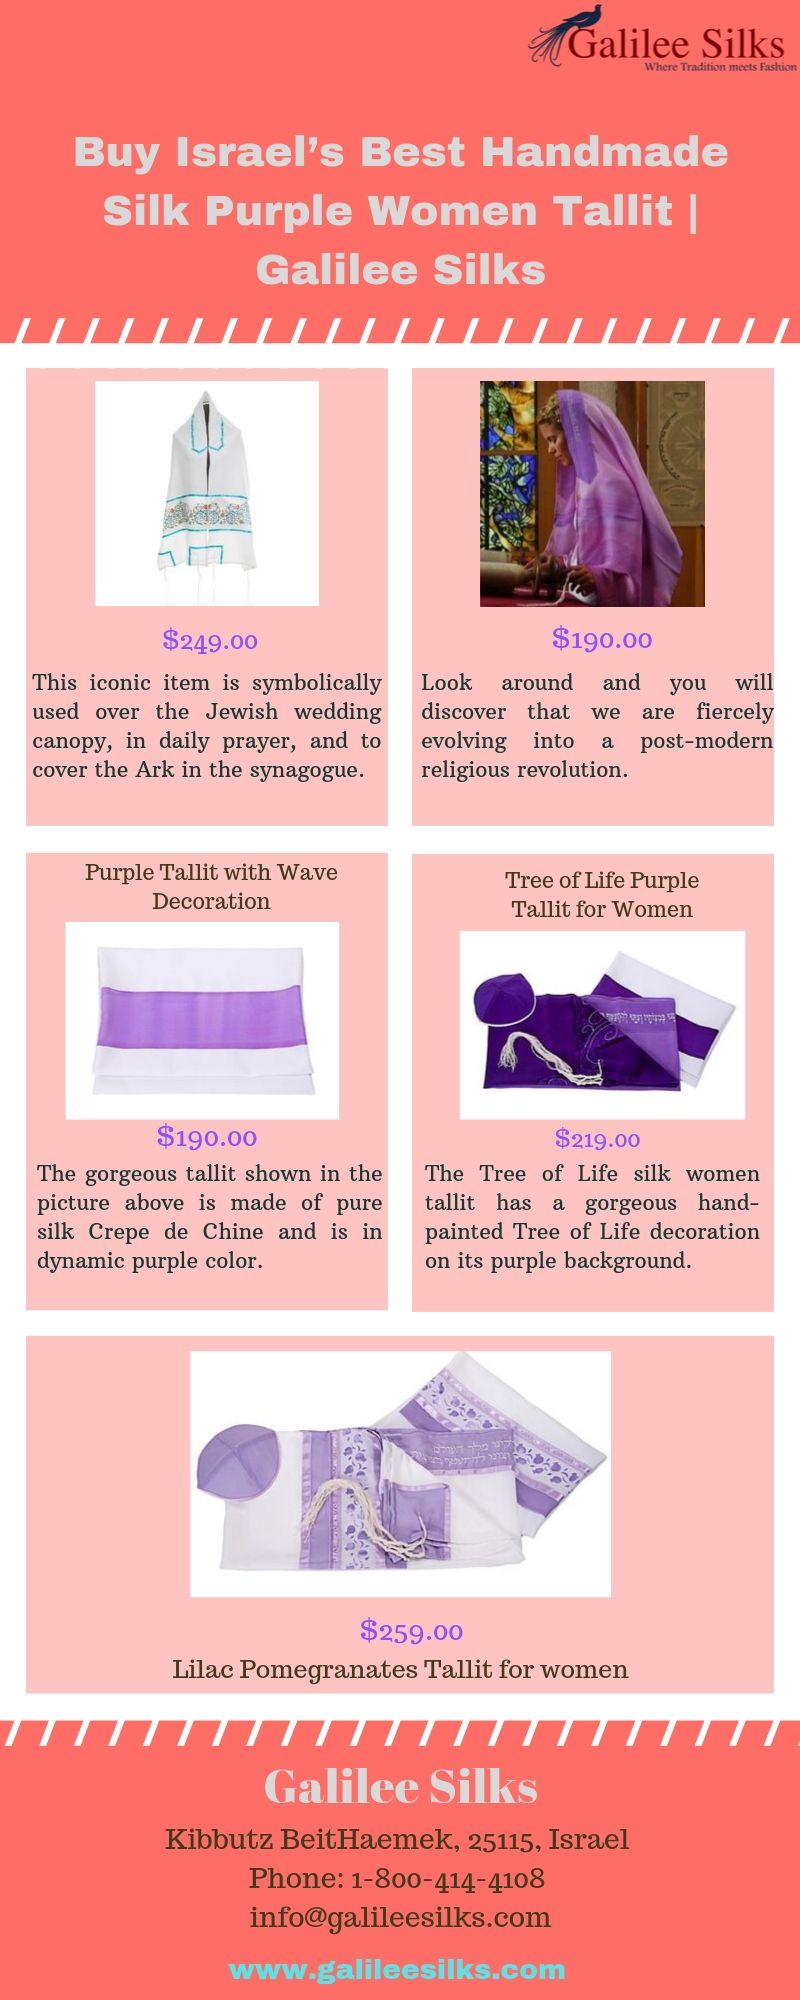 Buy Israel’s Best Handmade Silk Purple Women Tallit | Galilee Silks Buy the best quality Jewish prayer shawl with a feminine touch by choosing from this selection of stylish women’s tallitot at Galilee silks. For more detaols, visit this link: https://bit.ly/2W7etgn
 by amramrafi